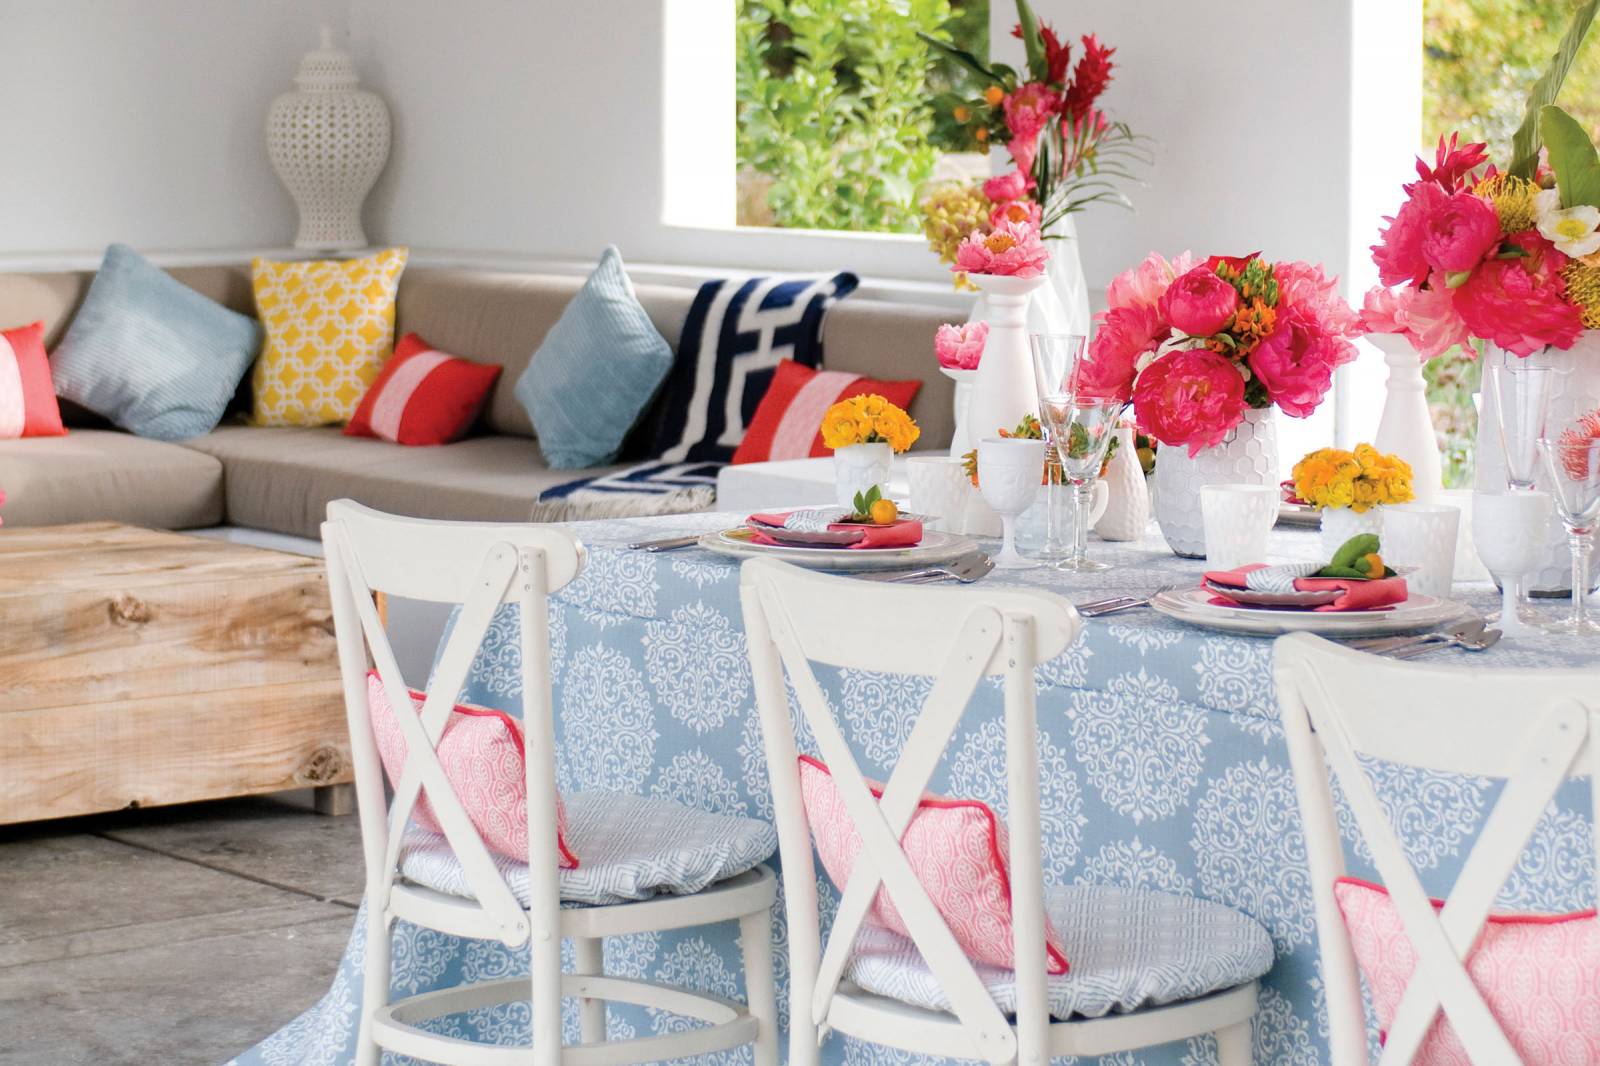 Multi-patterned linens with vibrant pink florals